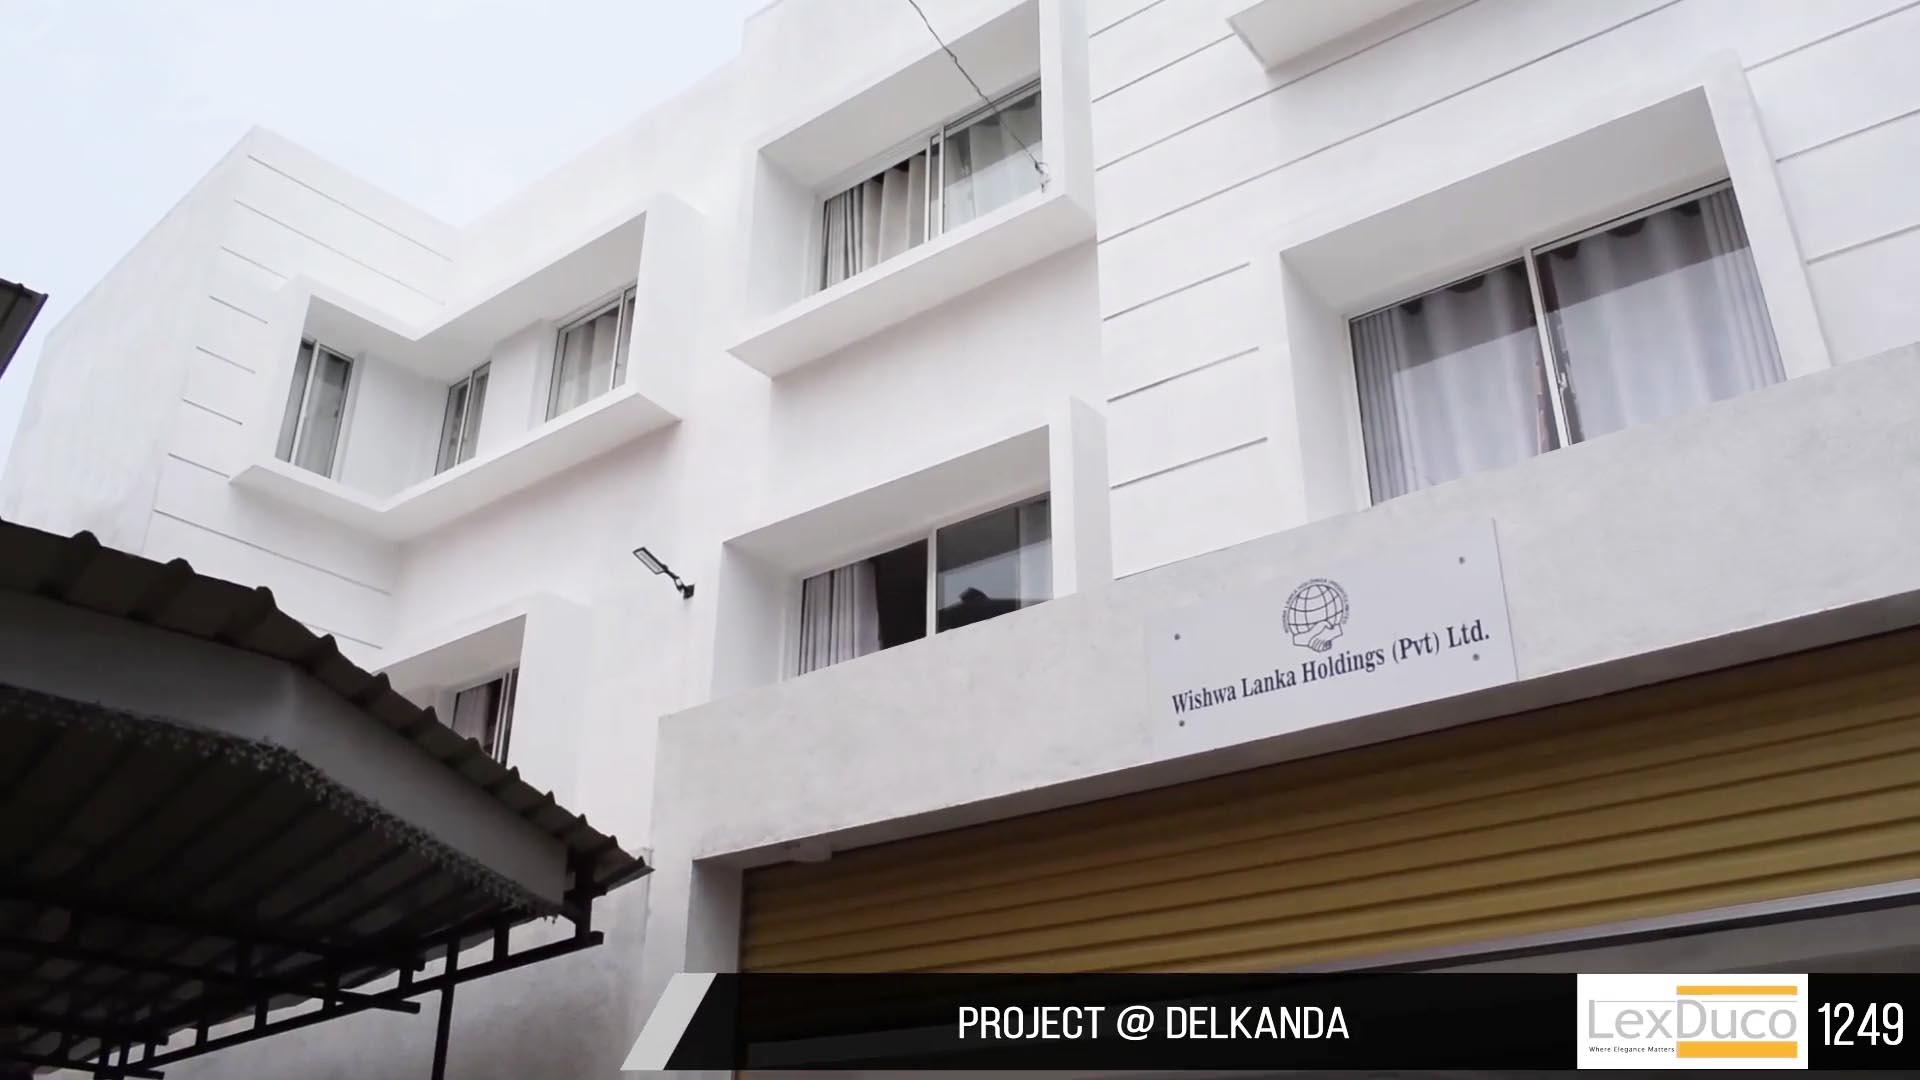 Residential Housing Project at Delkanda | Lex Duco